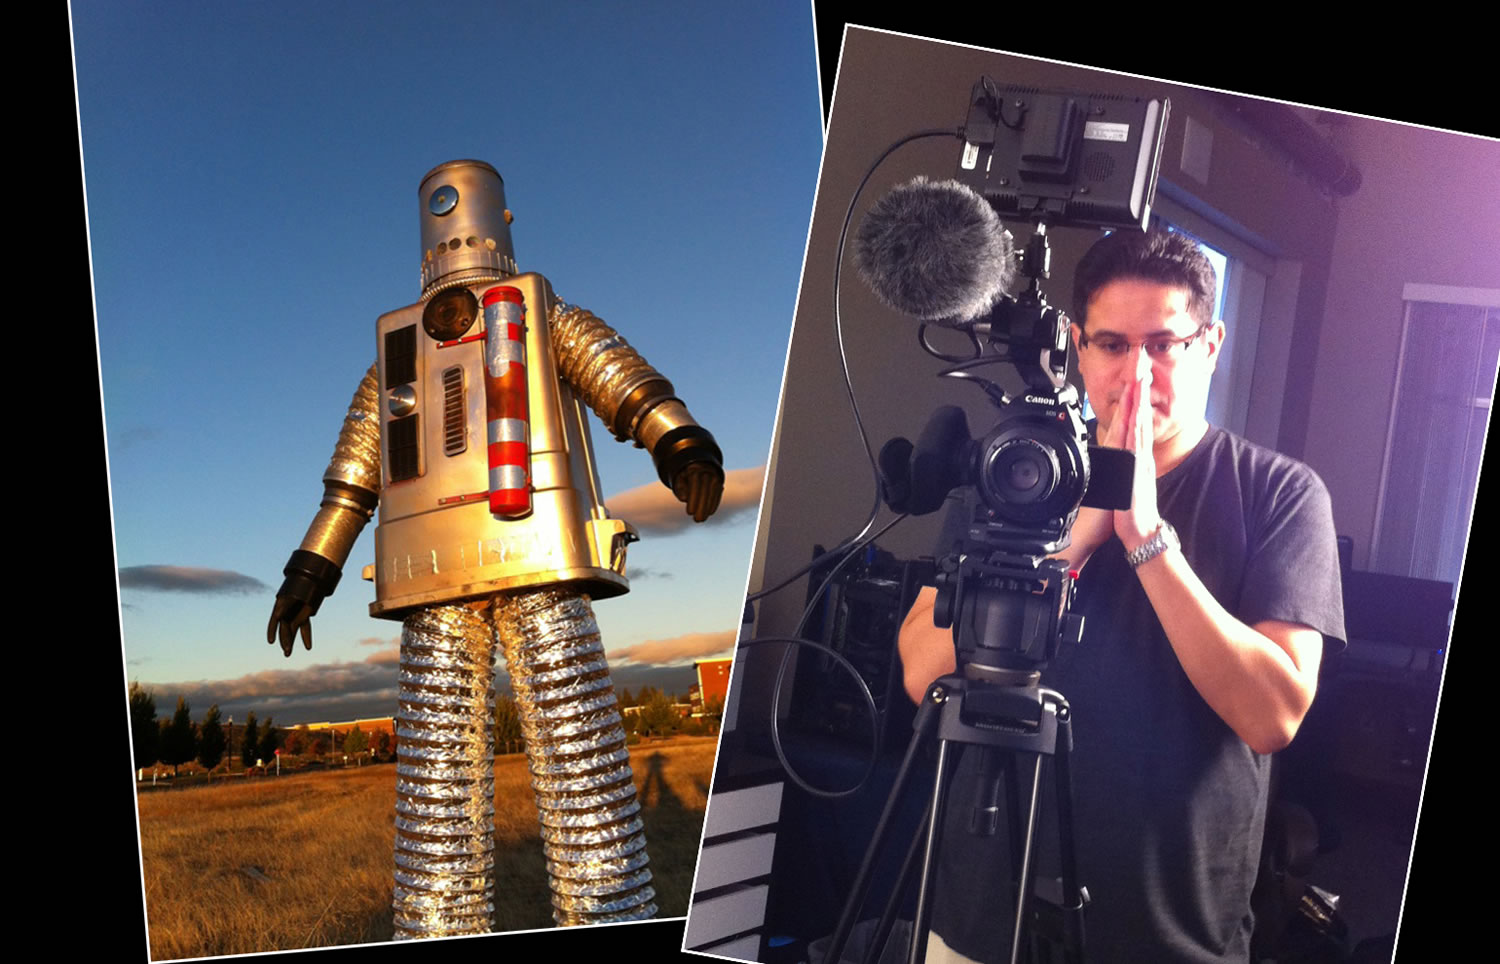 The robotic star (played by Joseph LeBard) of the new Lincoln's Beard music video &quot;Wired Monkeys&quot; stands in a Clark County field during filming this summer.